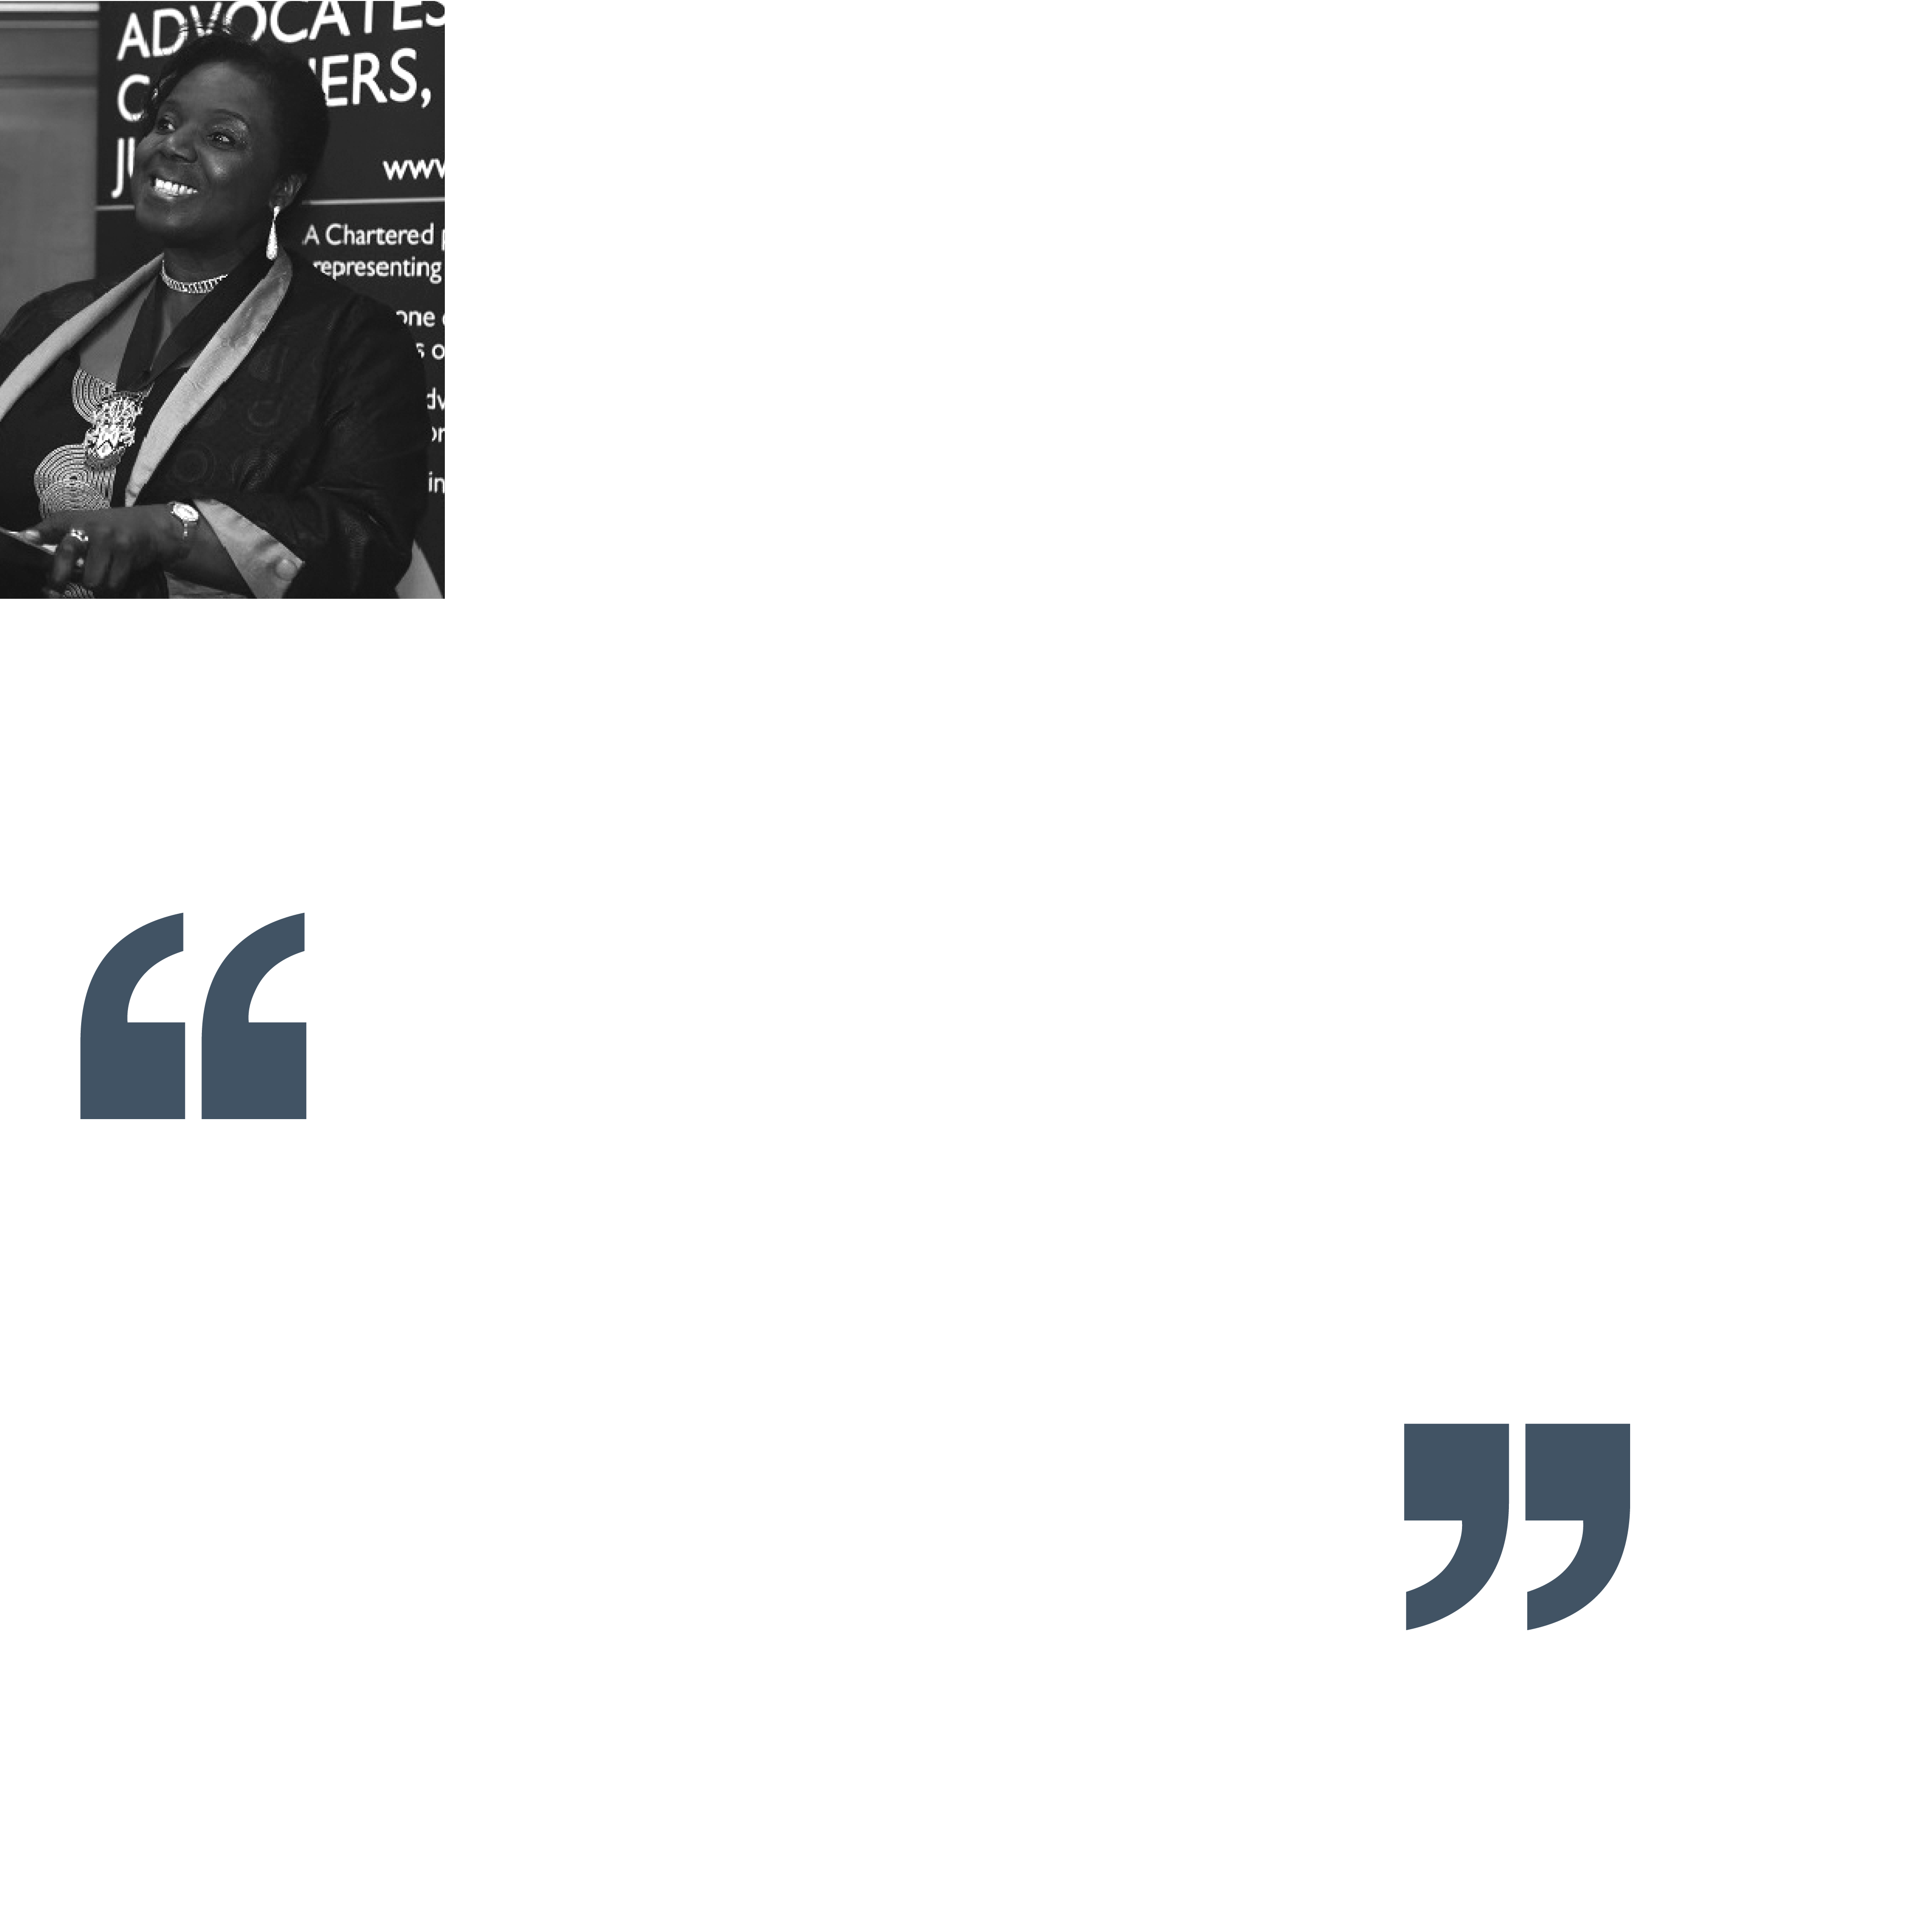 Quote from Millicent Grant, QC (Hon). "If you previously thought the law wasn't for you, I urge you to consider the CILEX Professional Qualification. It provides an accessible and affordable route to qualification that is open to all."